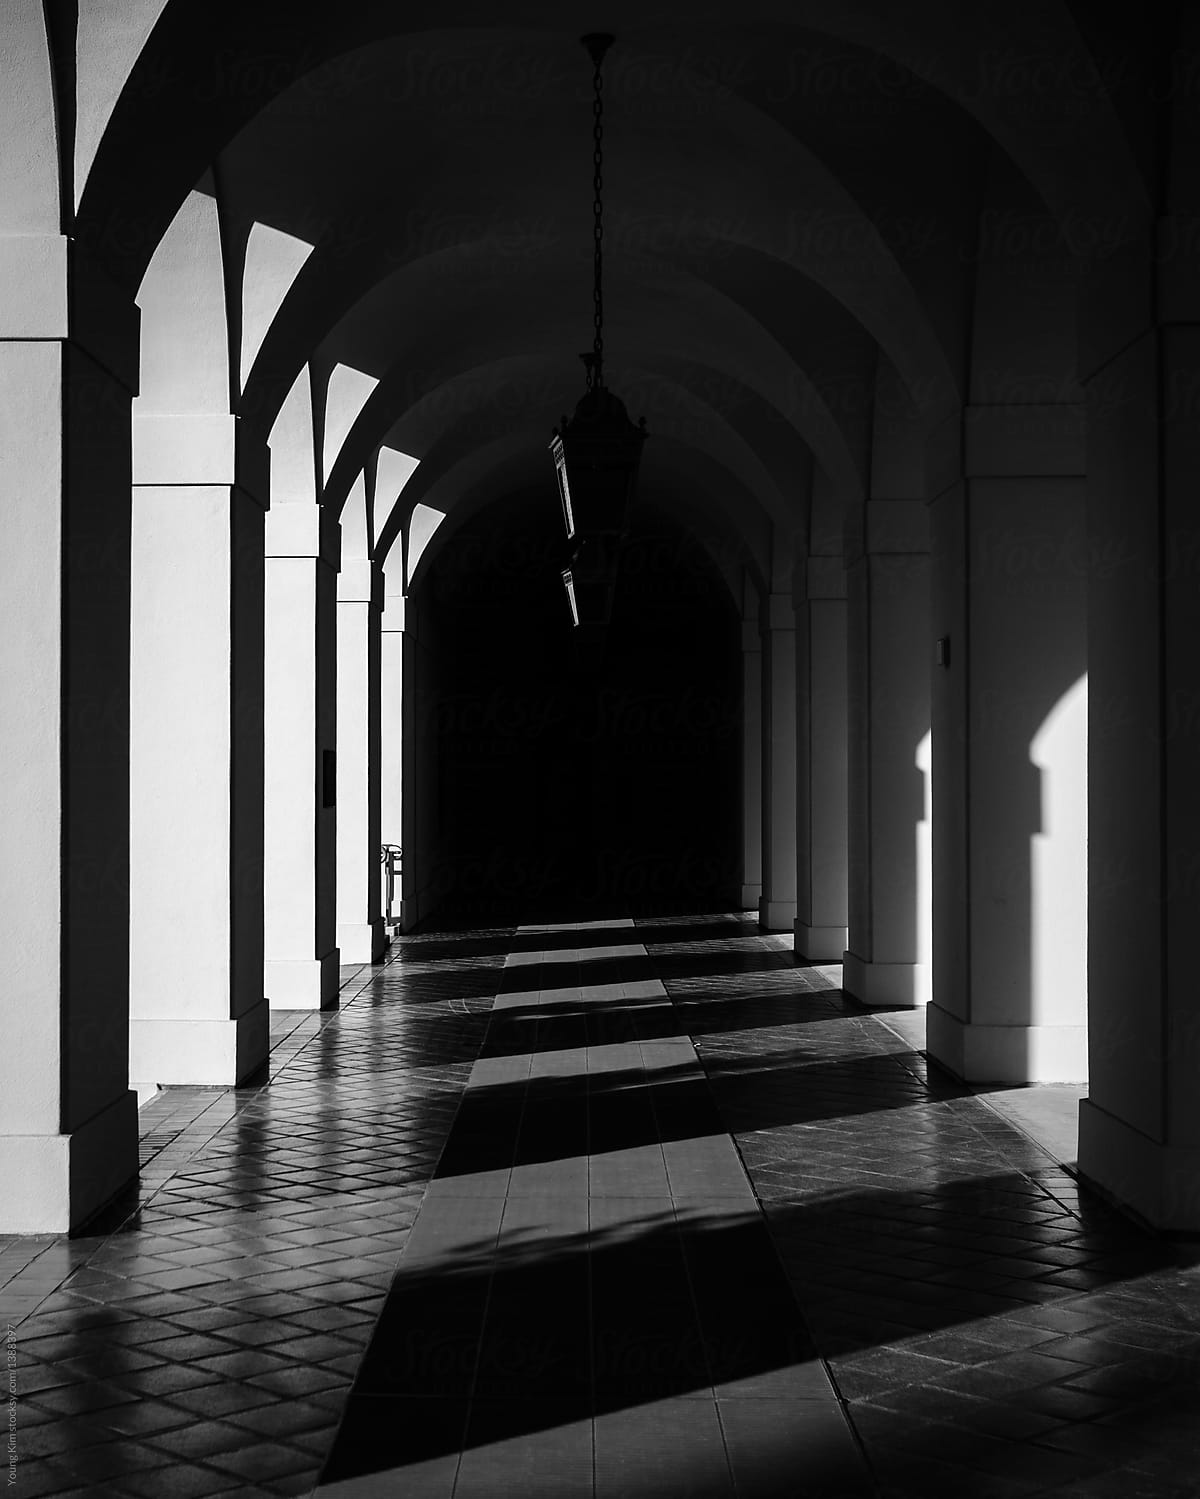 Hallway with shadows - black and white